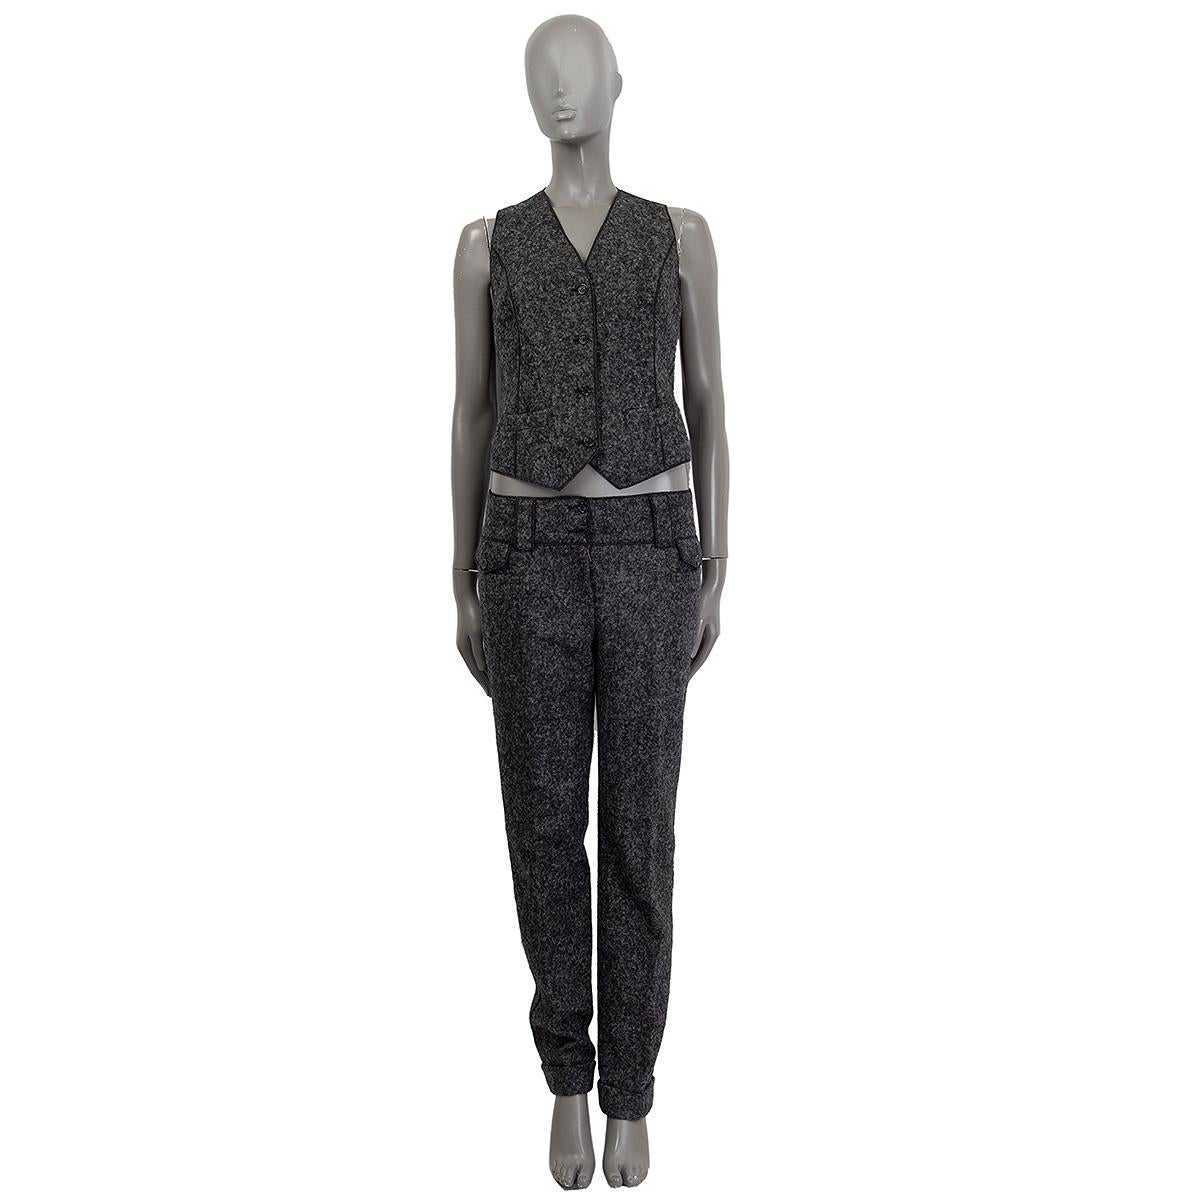 100% authentic Dolce & Gabbana buttoned vest in grey and black nylon (10%) (silk 30%) alpaca (60%) with a V-neckline, two slit pockets in the front, a felted fabric in the front and the back in silk. Lined in black silk (100%). Has been worn and is